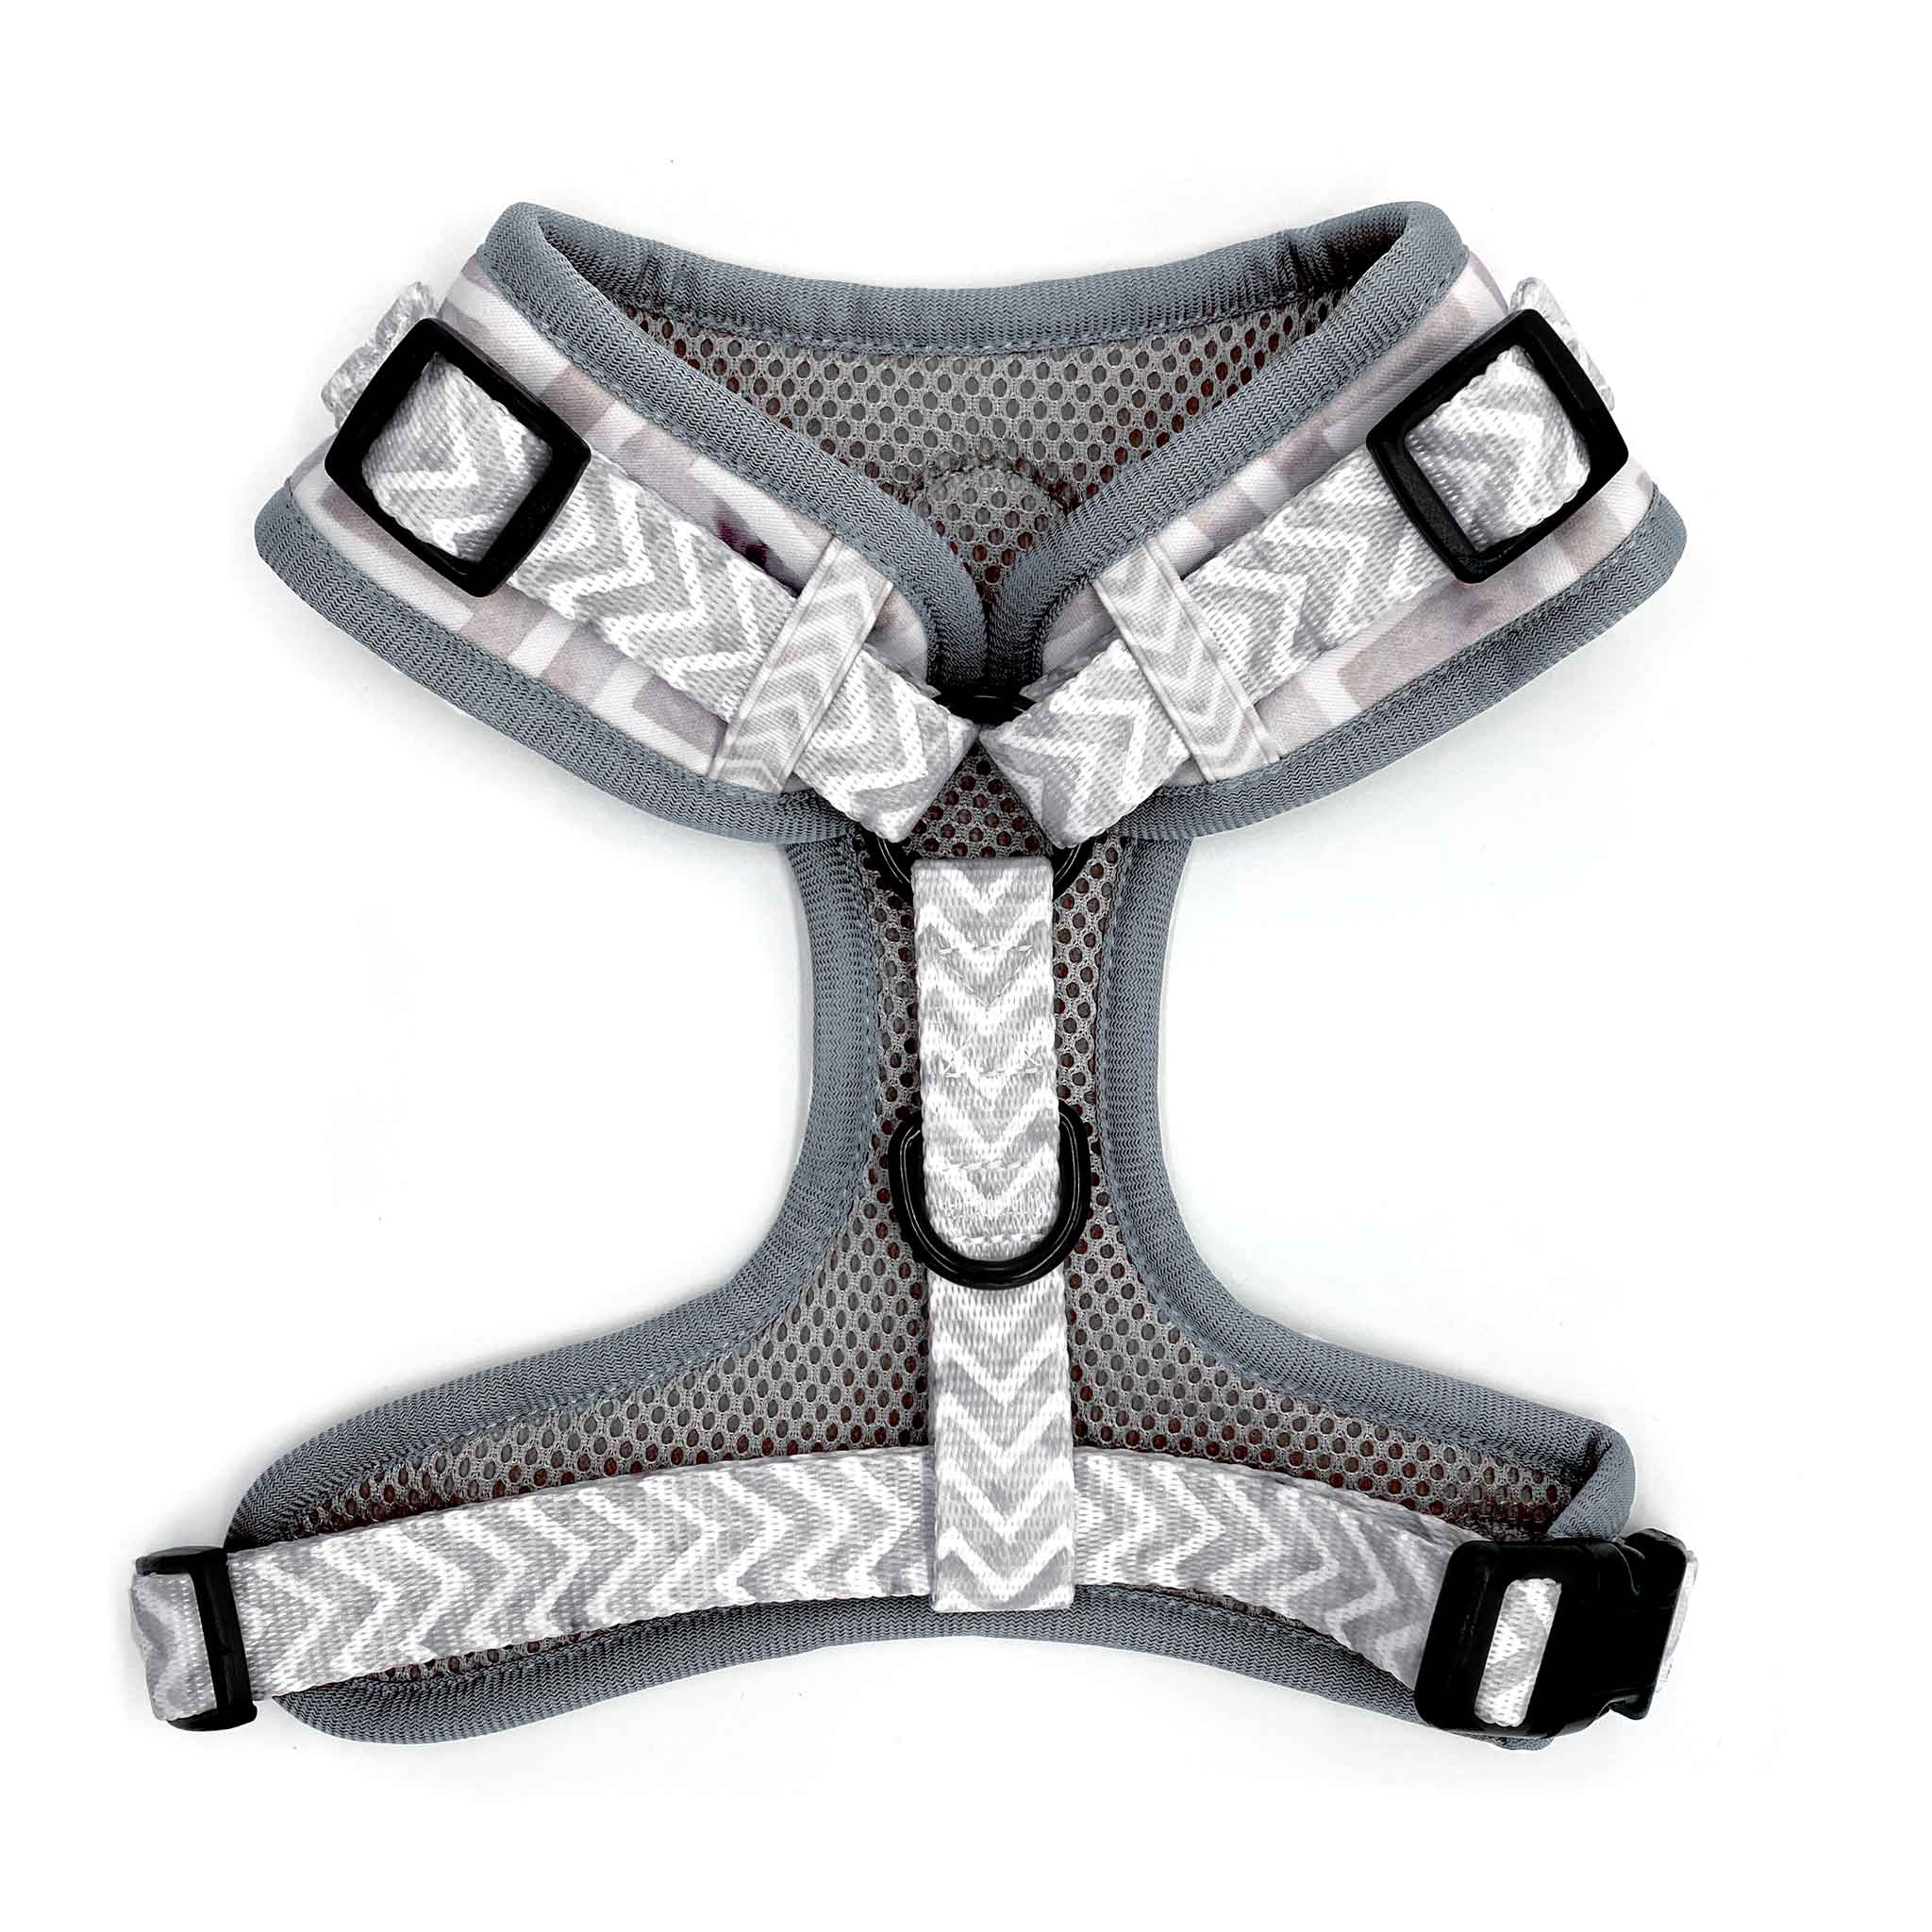 Back view of Pipco Pets adjustable dog harness with grey Zig Zags pattern